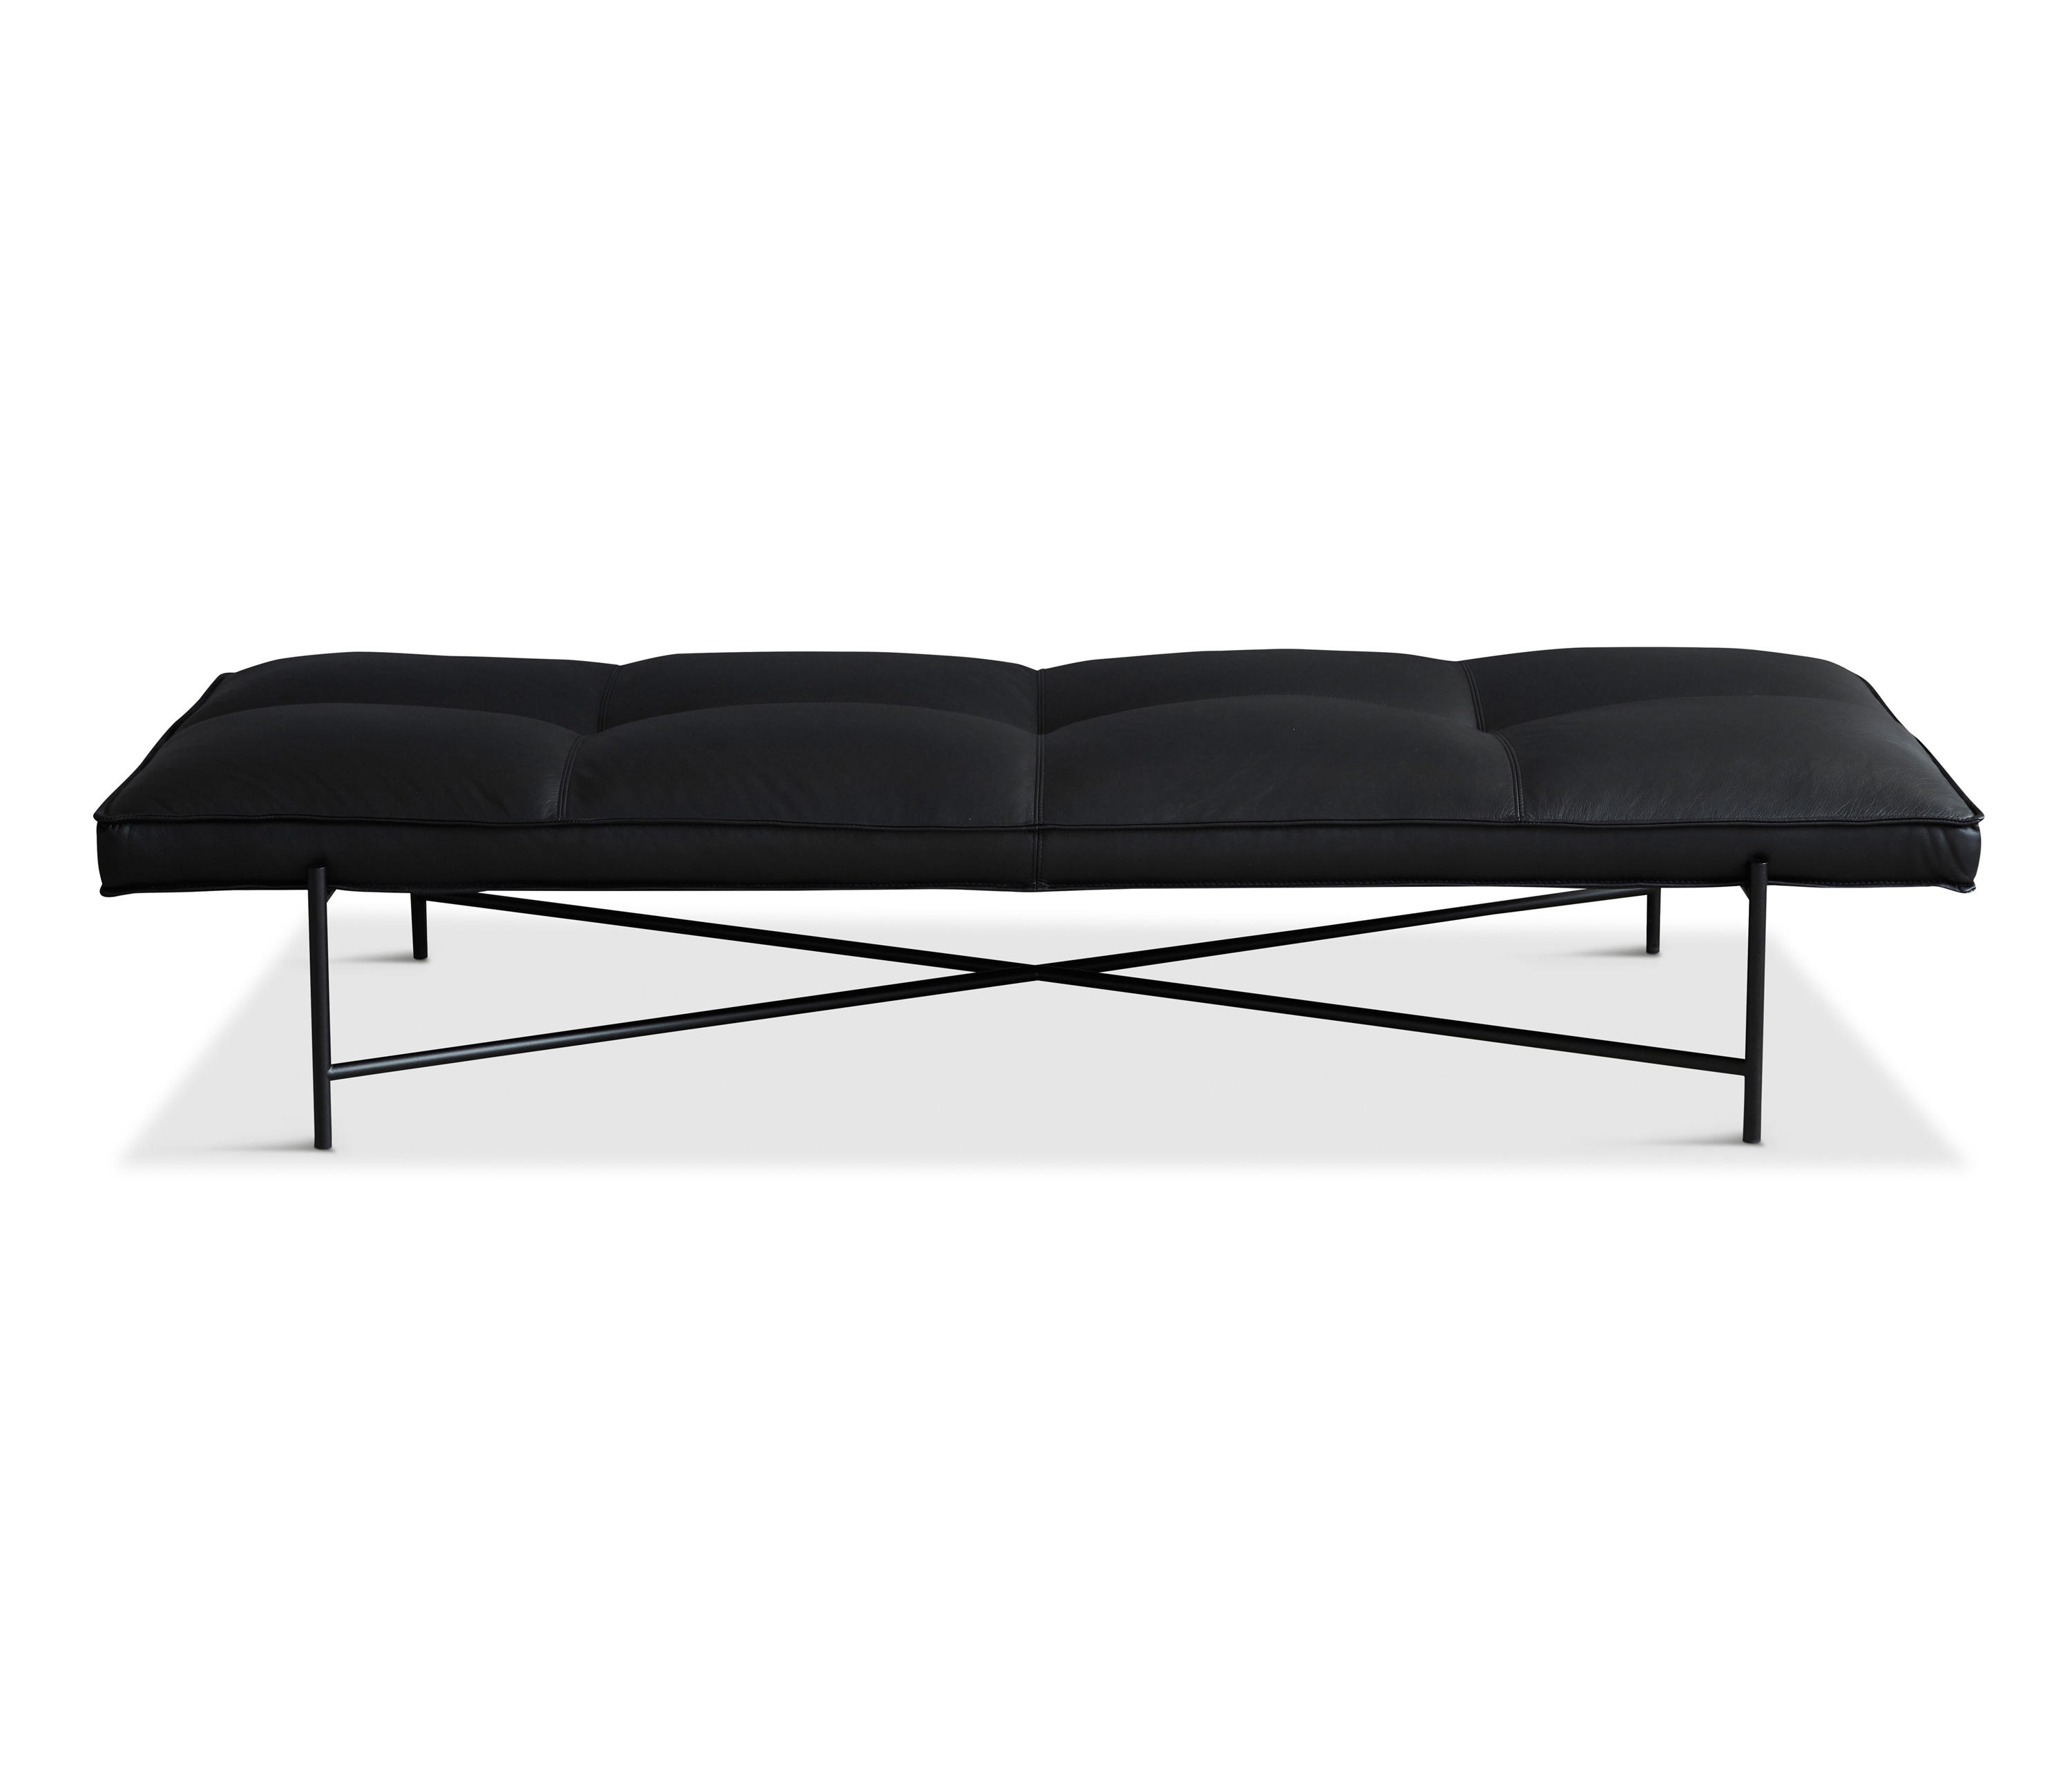 Daybed Black Aniline Leather, Black Leather Lounger